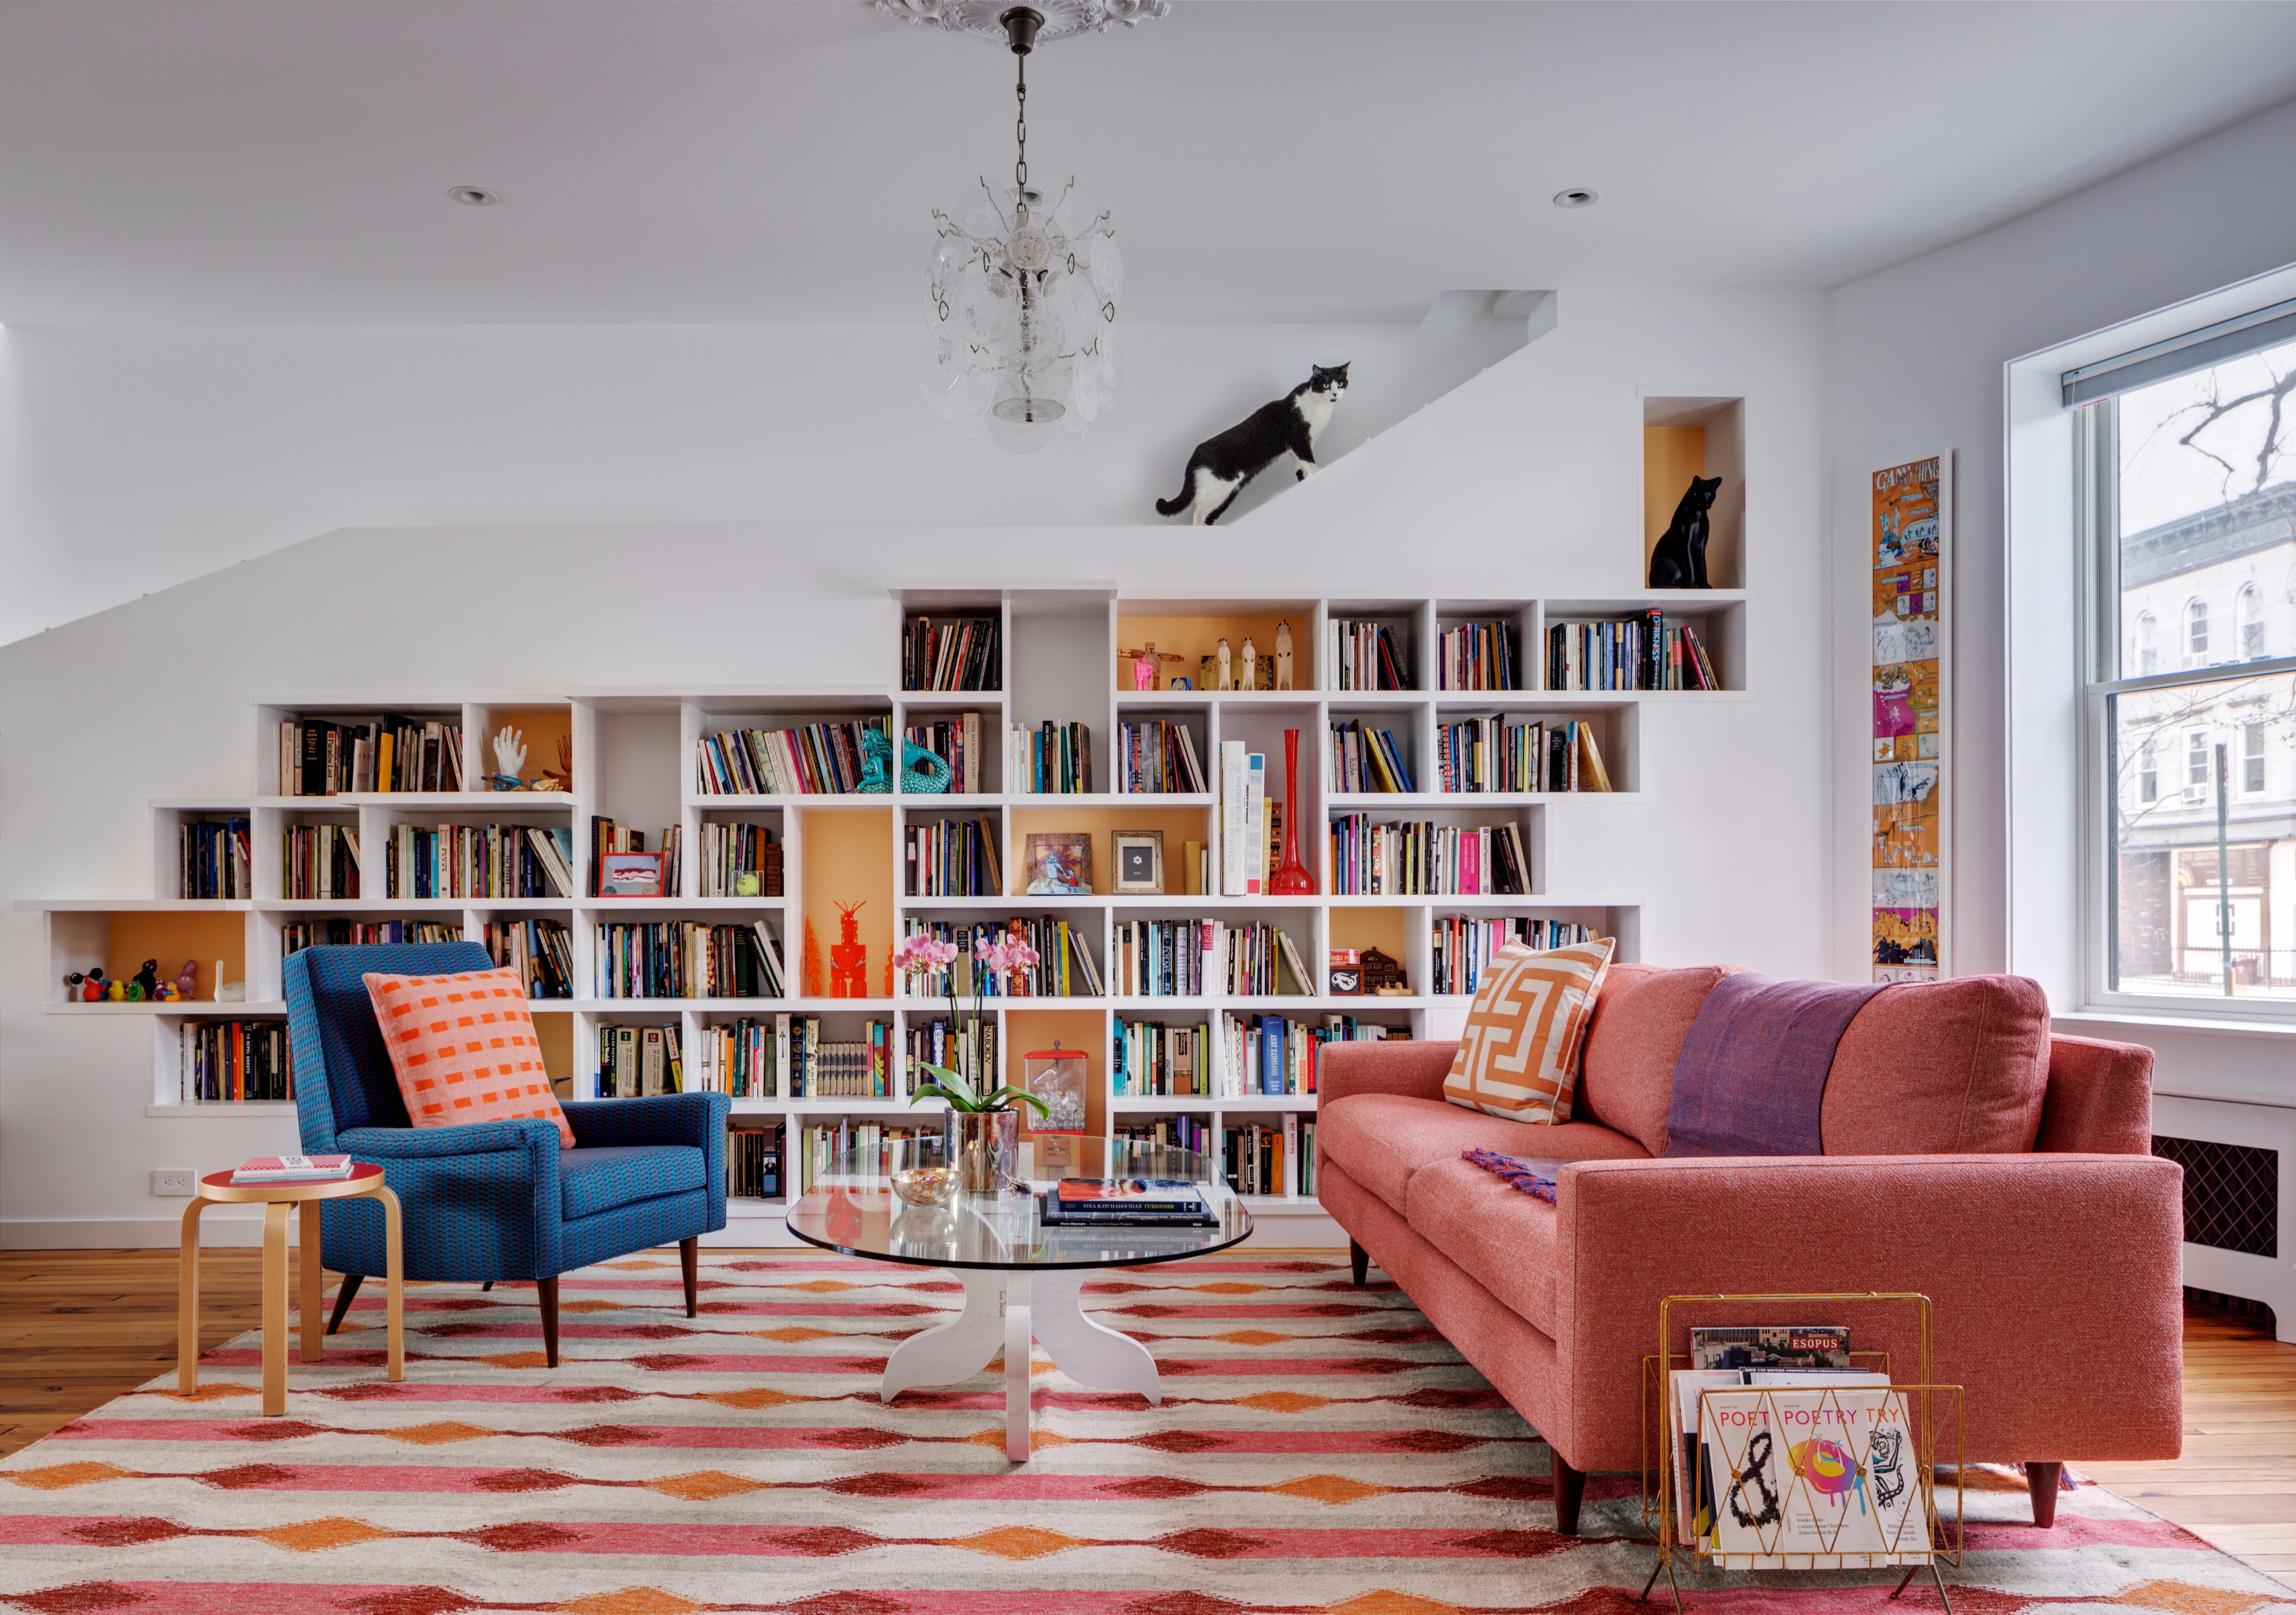 House for Booklovers & Cats in Brooklyn, New York by BFDO Architects